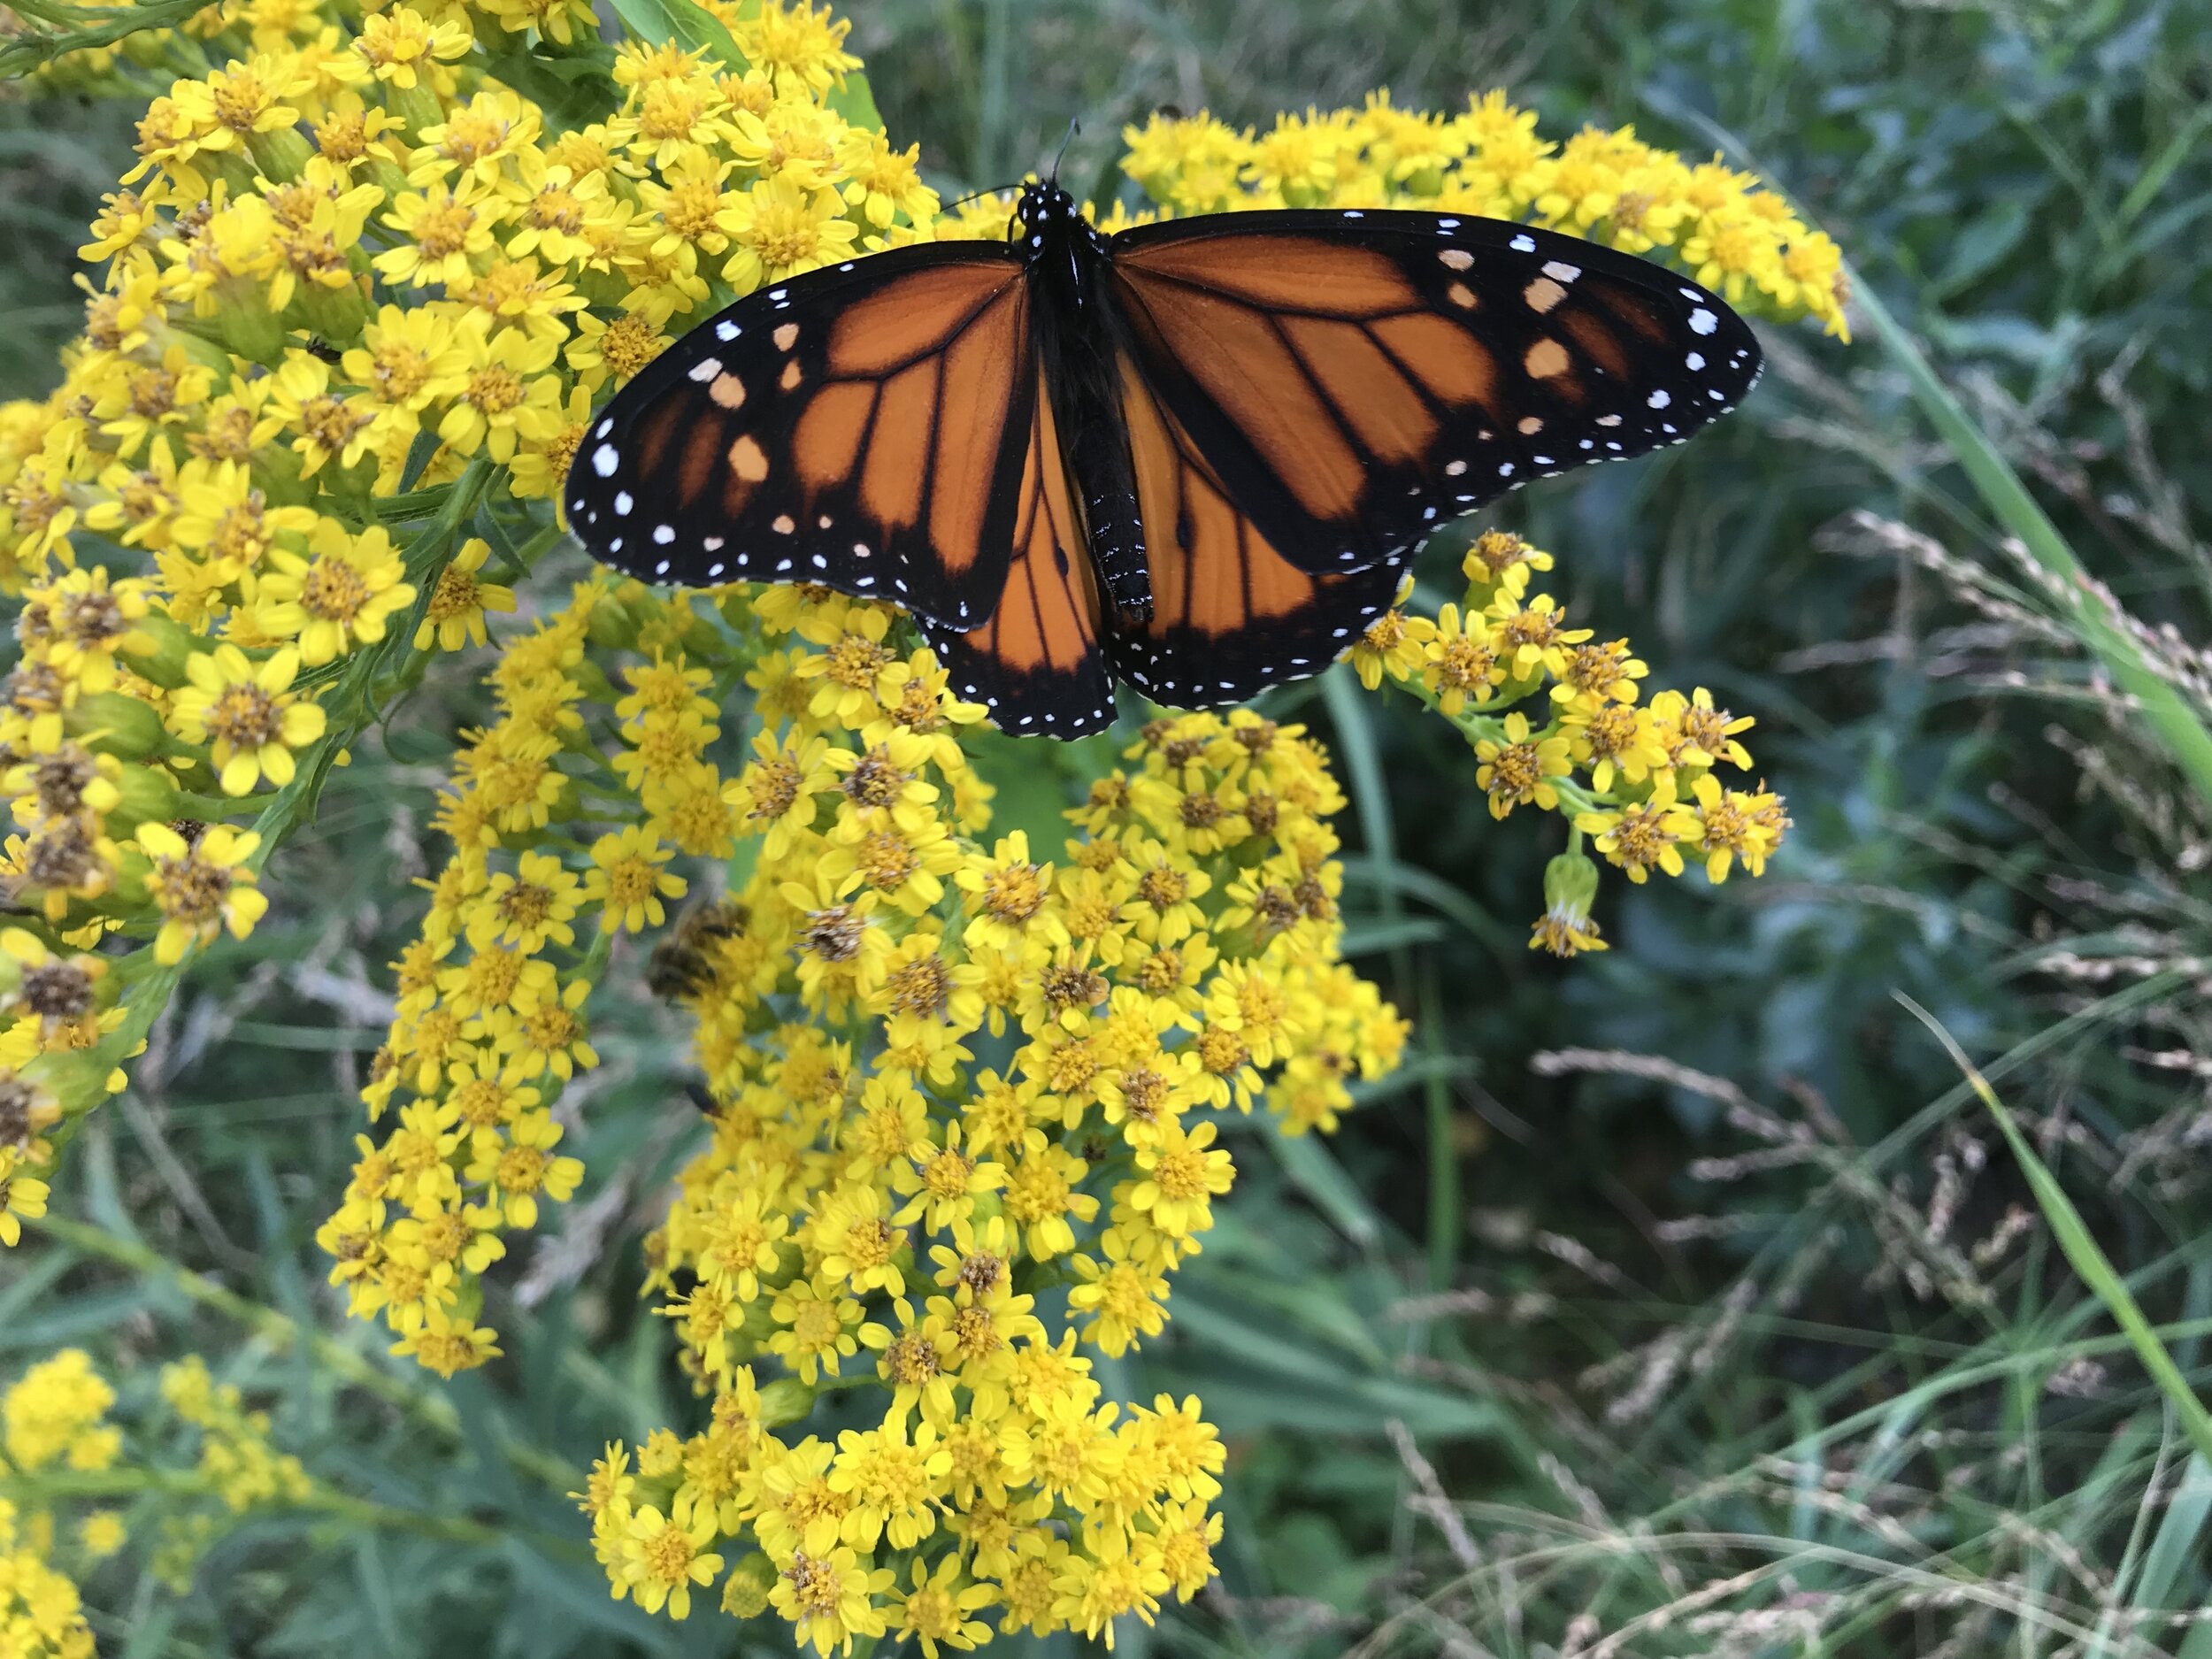  Goldenrod and other members of the Aster family tend to bloom in late summer and fall, providing some of the last food for pollinators before the winter. Goldenrod is also a valuable medicinal, dye plant, and tea. 